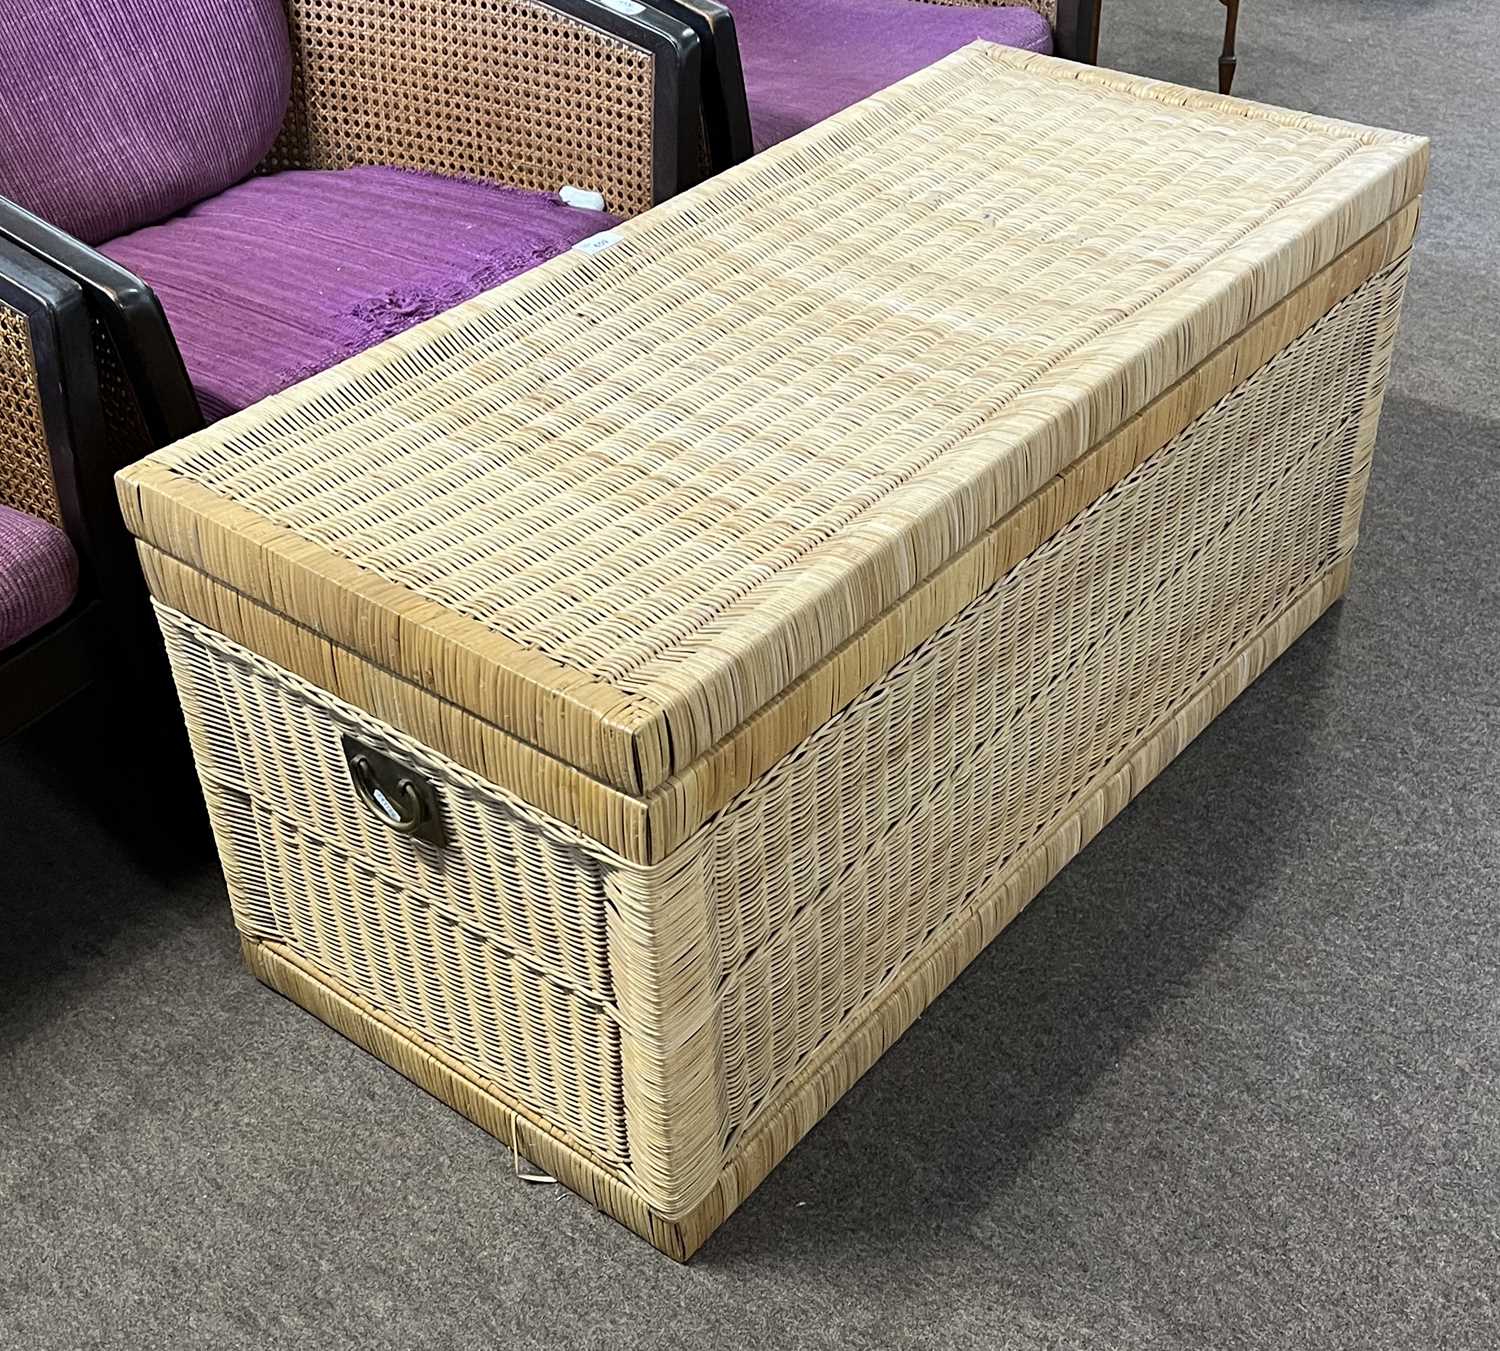 A mid 20th Century wicker blanket chest with brass handles at either end, 101cm long - Image 2 of 3